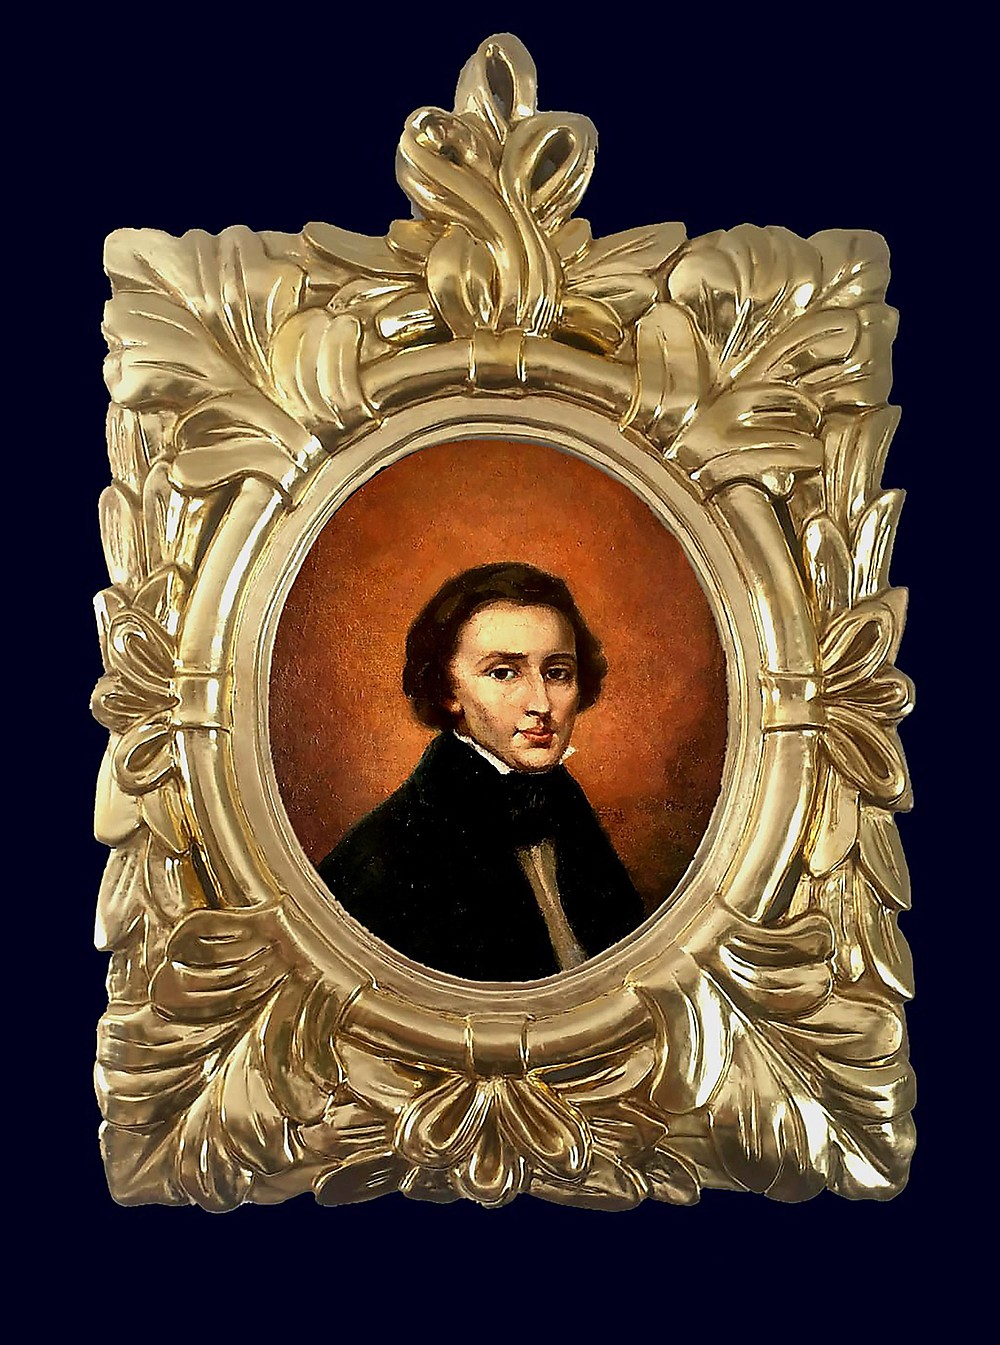 In this undated photo provided by Jaroslaw Golebiowski, a view of a renovated portrait of Polish composer Frederic Chopin. A peeling portrait of Polish piano composer Frederic Chopin purchased at a flea market hung modestly in a private house in Poland for almost three decades before an expert dated the painting to the 19th century. The small painting now resides in a bank vault somewhere in eastern Poland while its owners negotiate their next steps. News of the artwork&#x2019;s existence broke this week as Warsaw hosted the 18th Frederic Chopin Piano Competition. The art expert who examined the portrait says it has significant historic value, but he refrained from estimating what it might sell for.  (Jaroslaw Golebiowski via AP)